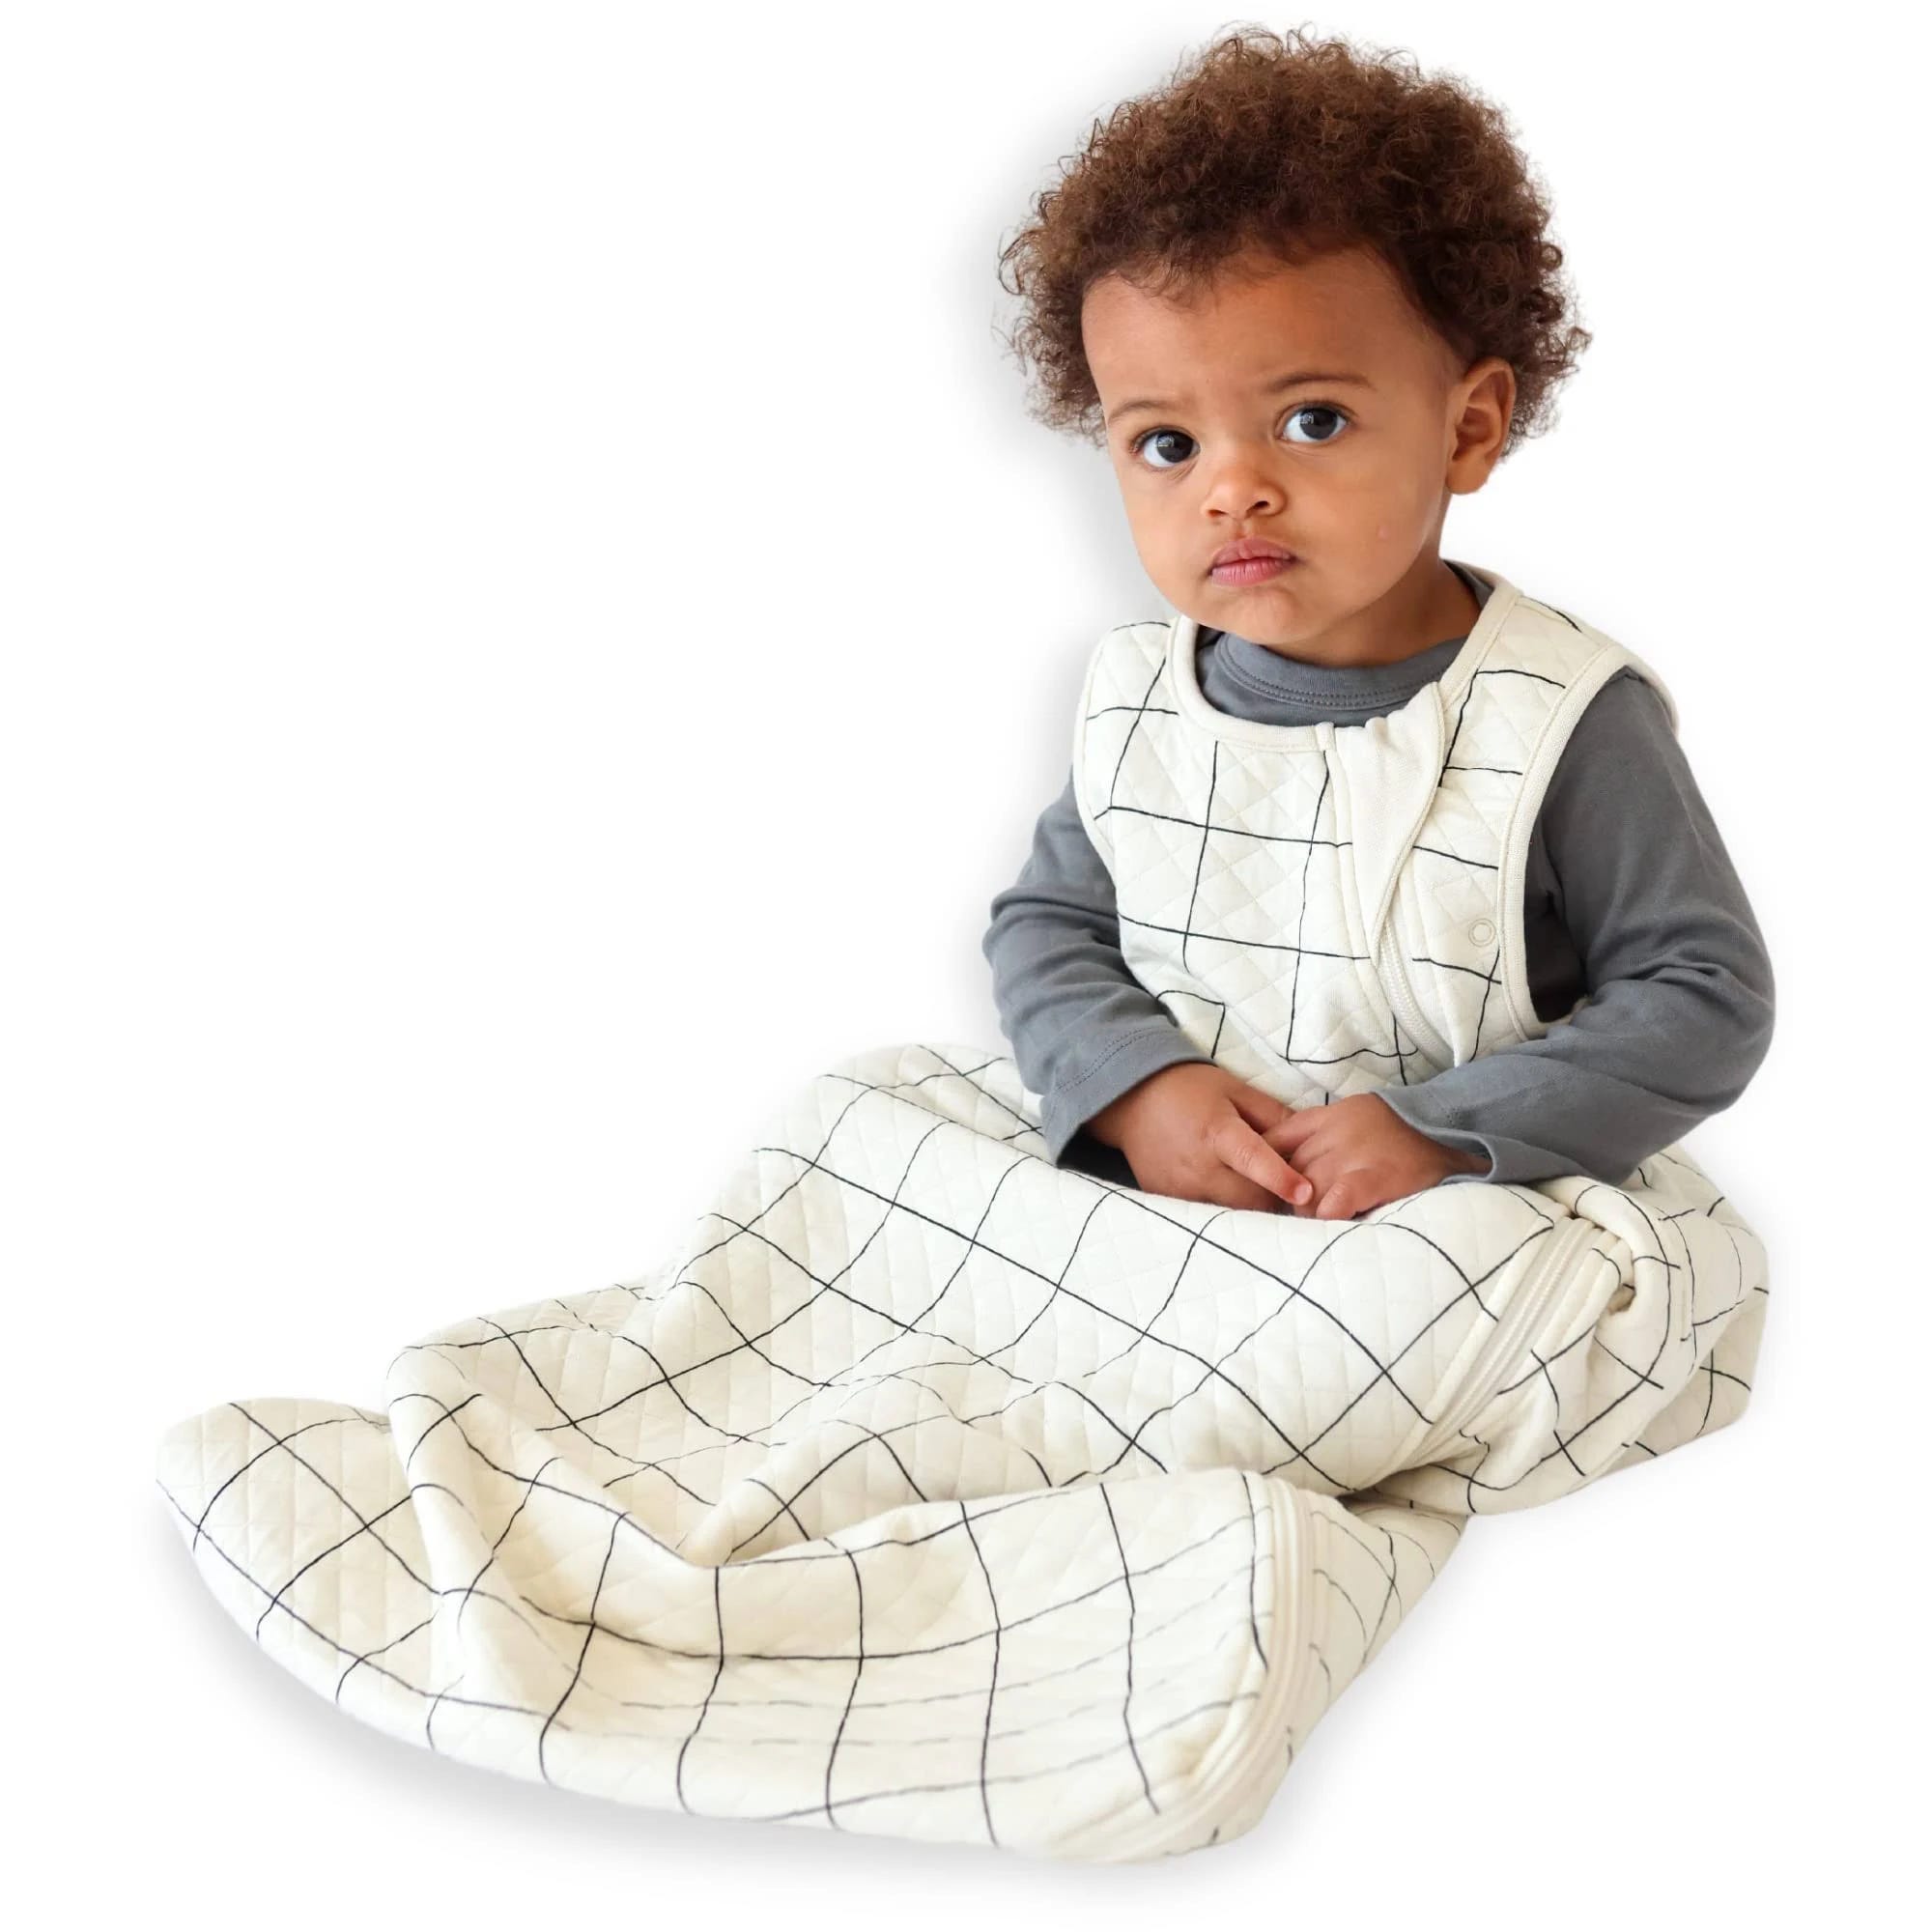 Tealbee Dreambag: Versatile Wearable Baby Sleeping Bag Made from Bamboo and Organic Cotton | Image